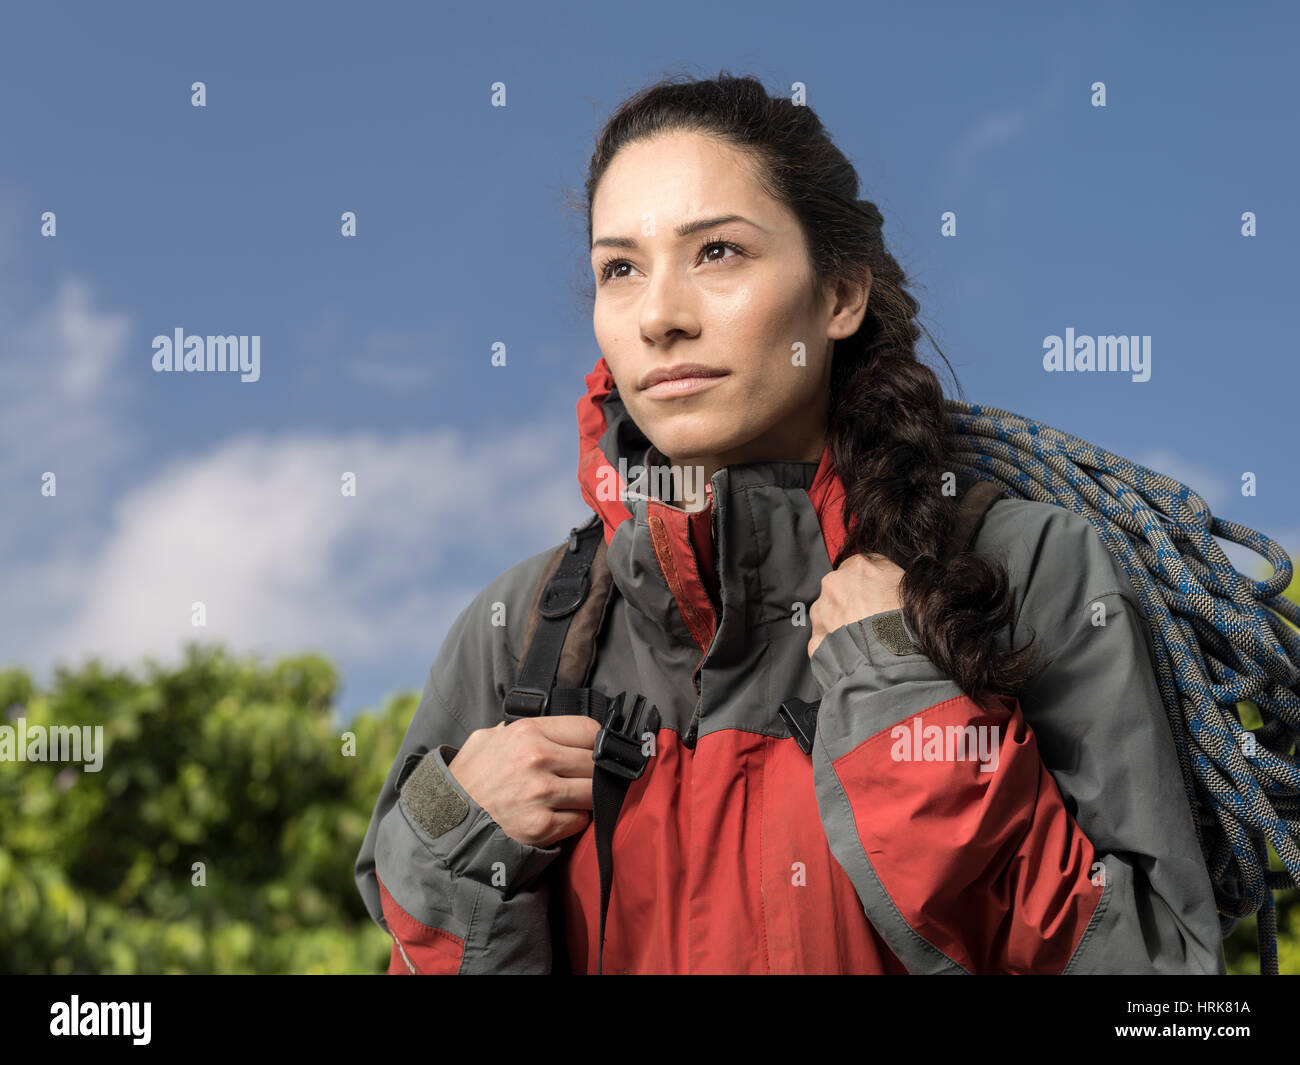 Woman mountain climber with jacket and rope Stock Photo